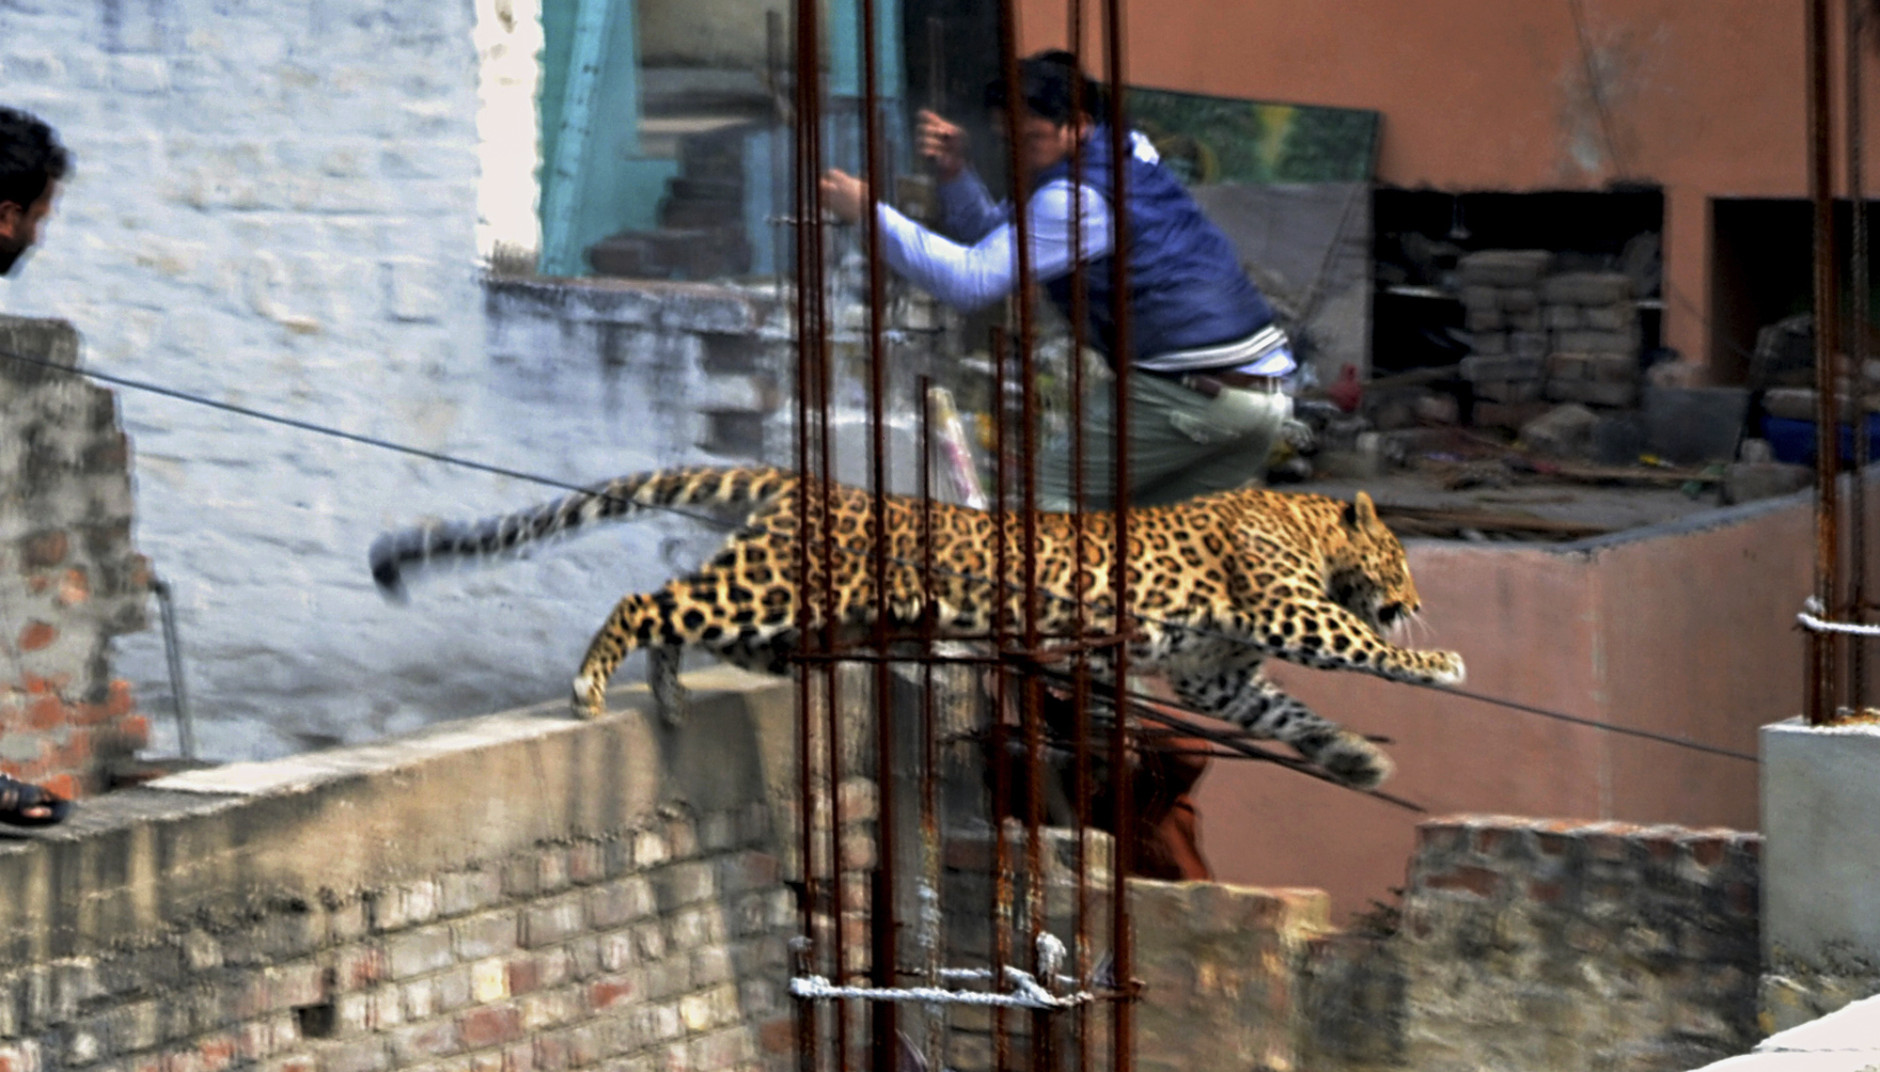 FOR USE AS DESIRED, YEAR END PHOTOS - FILE - In this Sunday, Feb. 23, 2014 photo, an Indian man moves out of the way of a leopard in the northern Indian city of Meerut, India. Forestry officials and police armed with tranquilizer darts searched for a leopard that injured six people in the northern Indian city, creating panic and driving people indoors, police said Tuesday. (AP Photo/File)